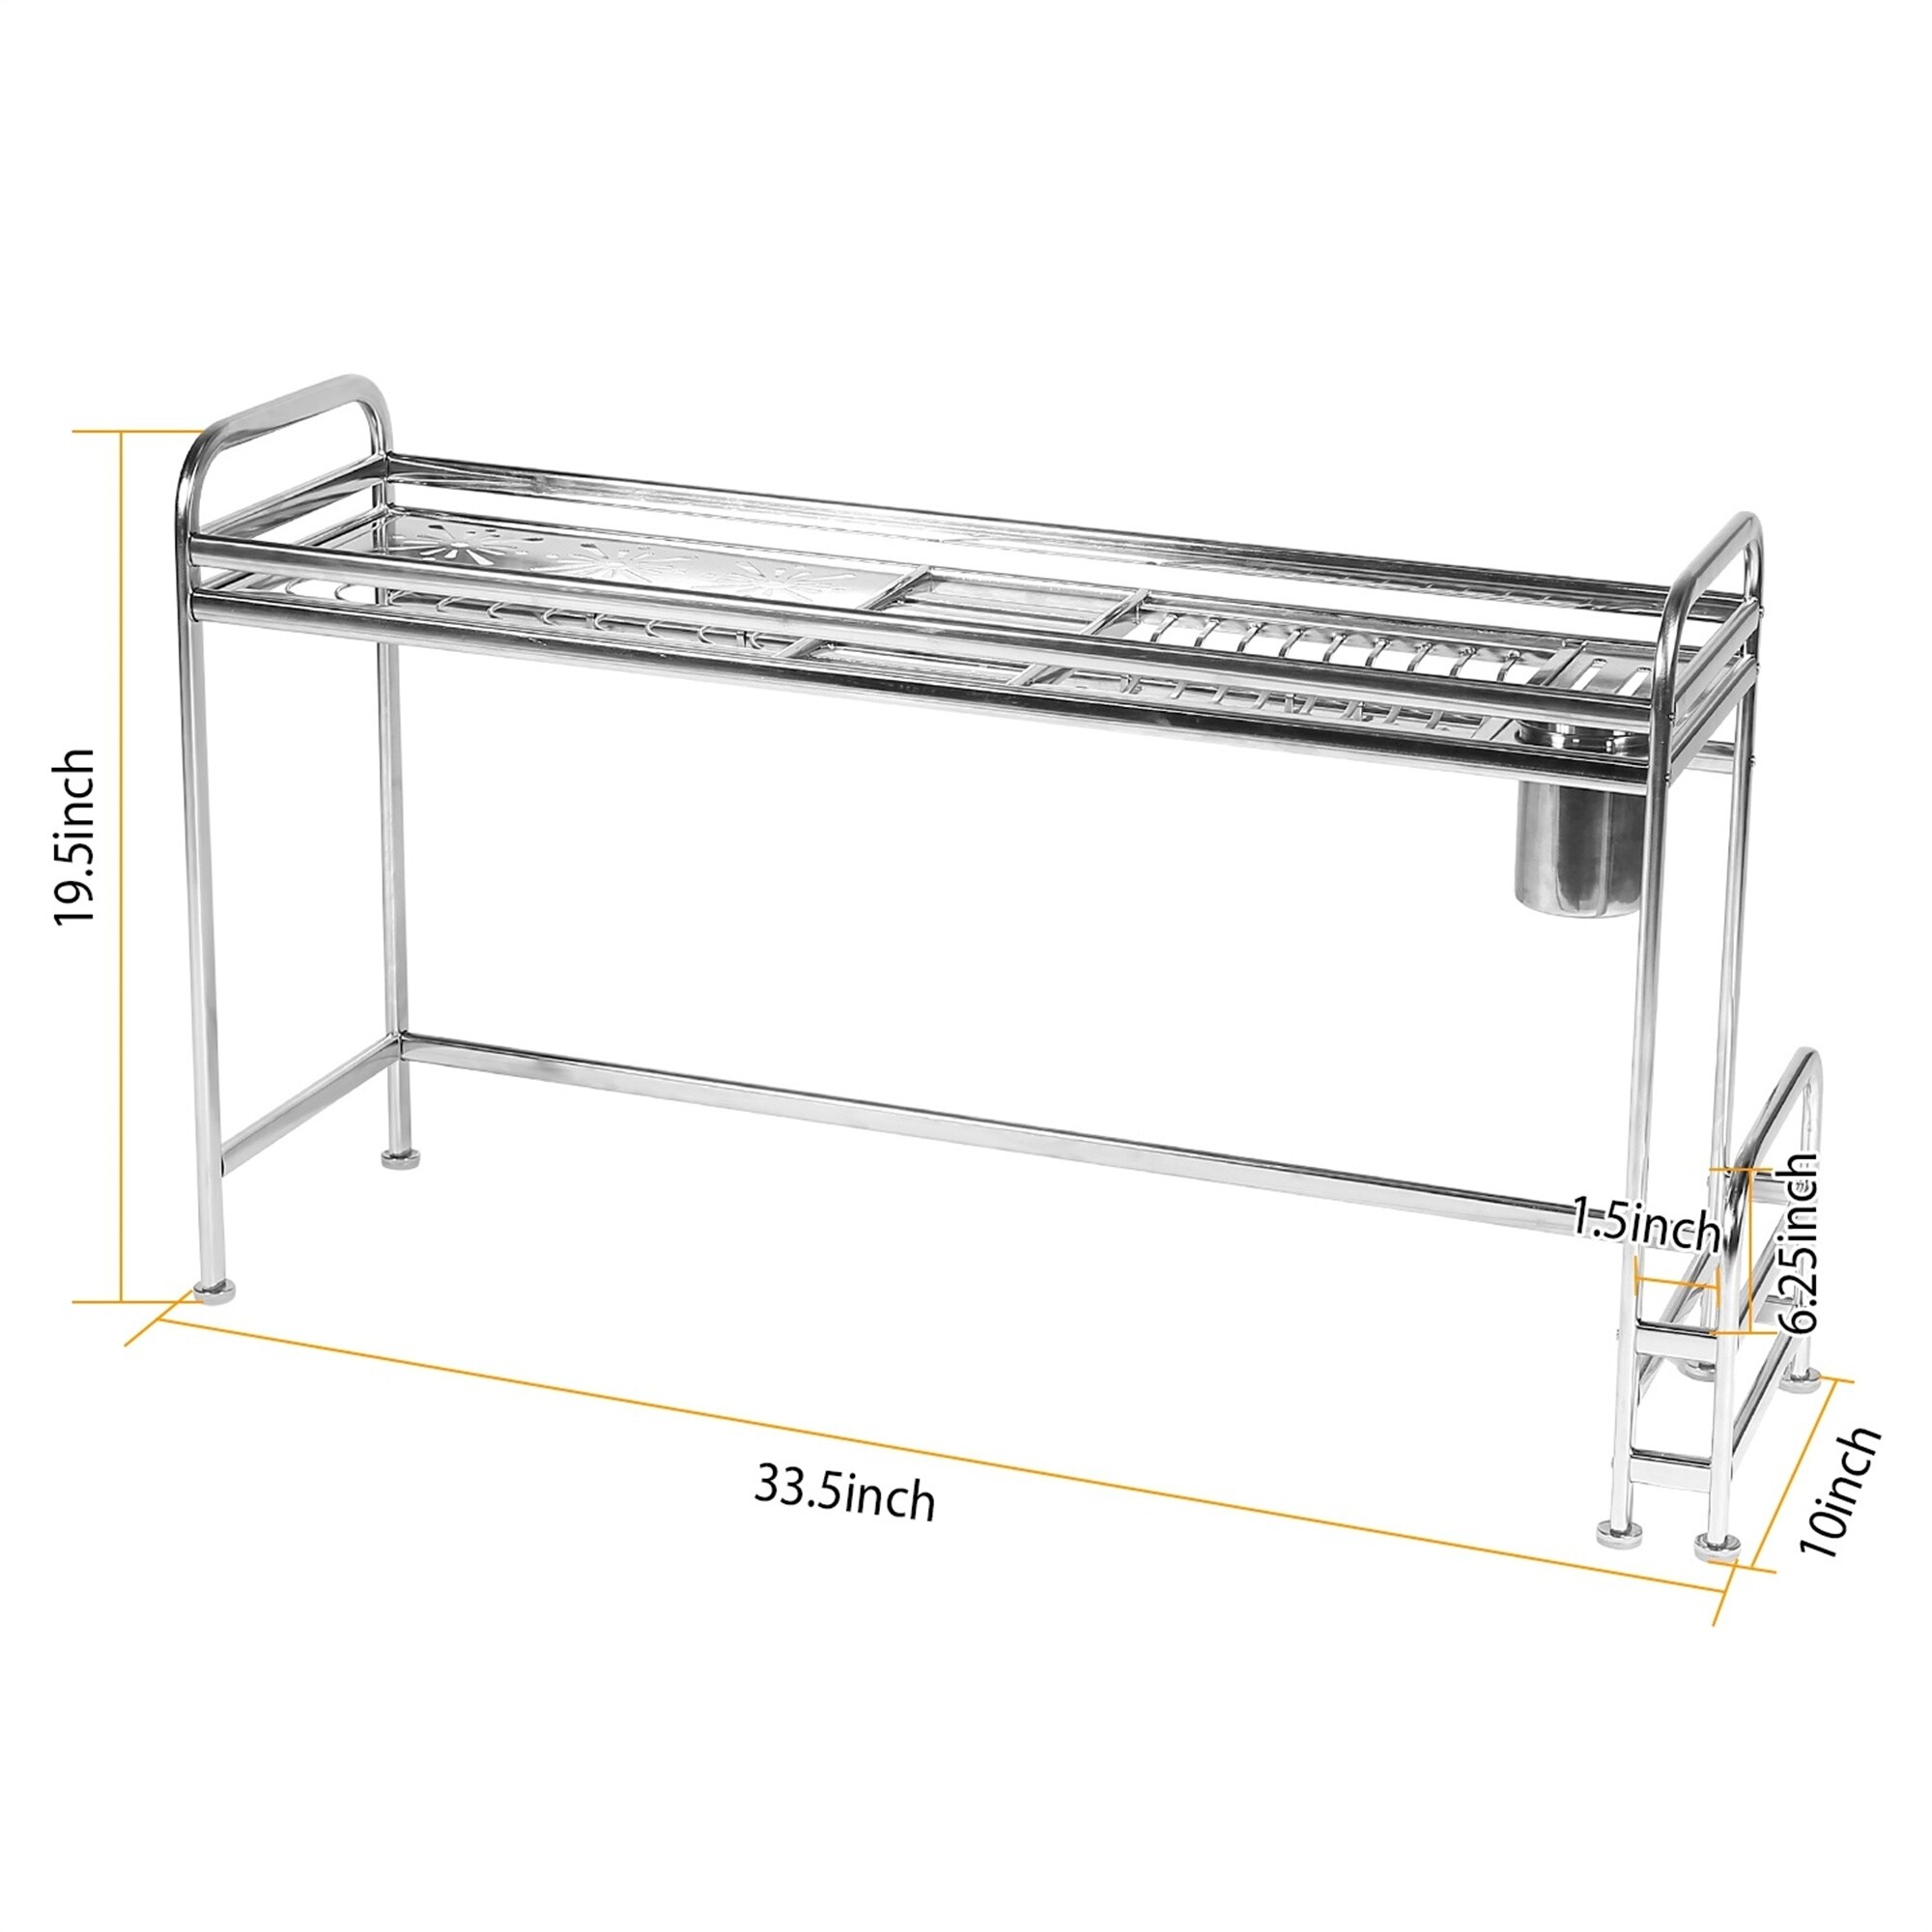 https://ak1.ostkcdn.com/images/products/is/images/direct/b691f81bae13f91eda2b4863e6ac1cc5ccc1bd4d/Kitchen-Organizer-Shelf-Rack-with-Drain-Holes%2C-Space-Saving%2C-Home-Dorm.jpg